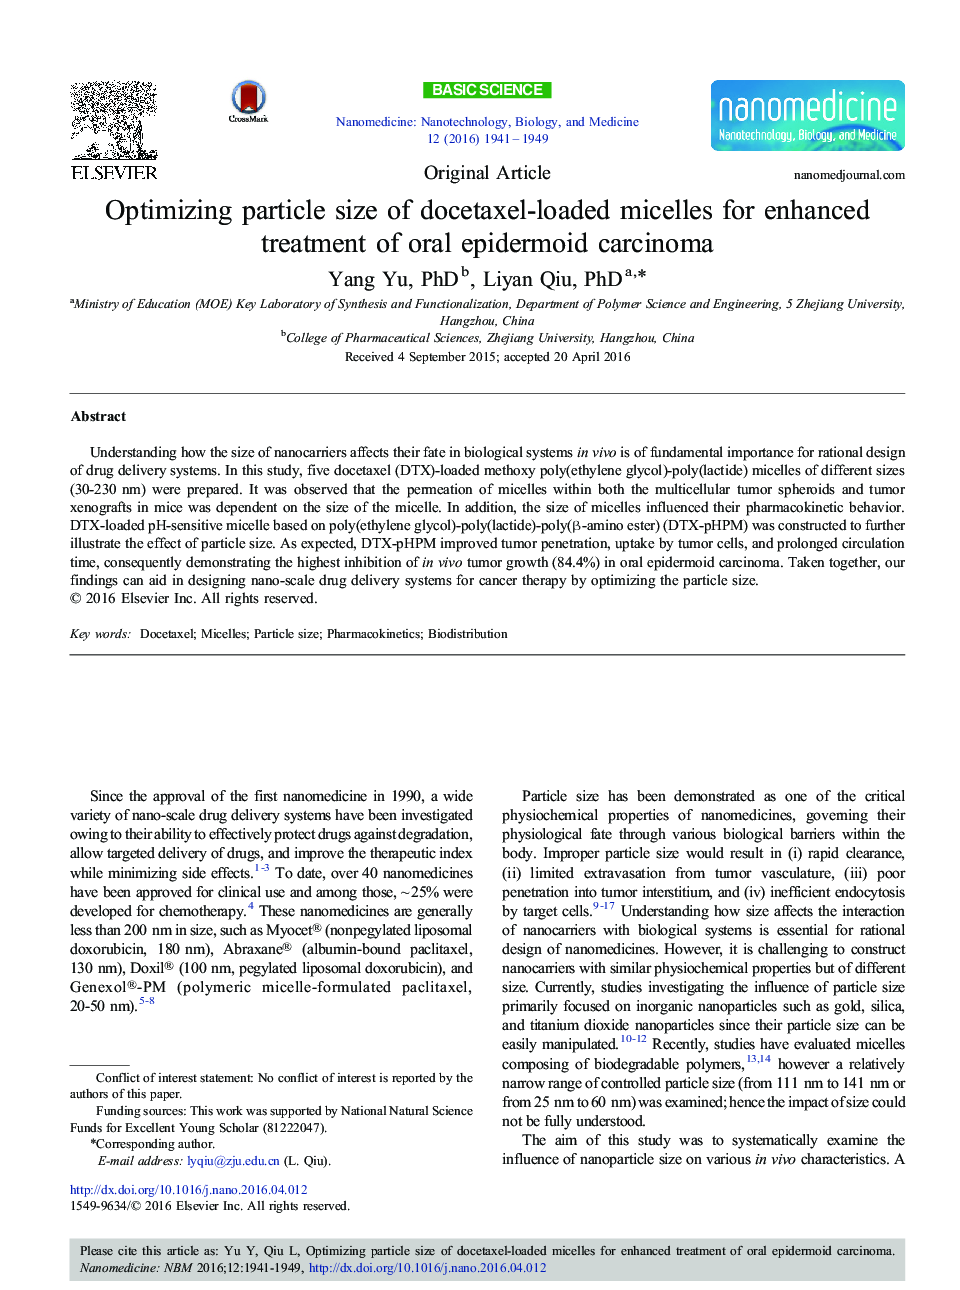 Original ArticleOptimizing particle size of docetaxel-loaded micelles for enhanced treatment of oral epidermoid carcinoma